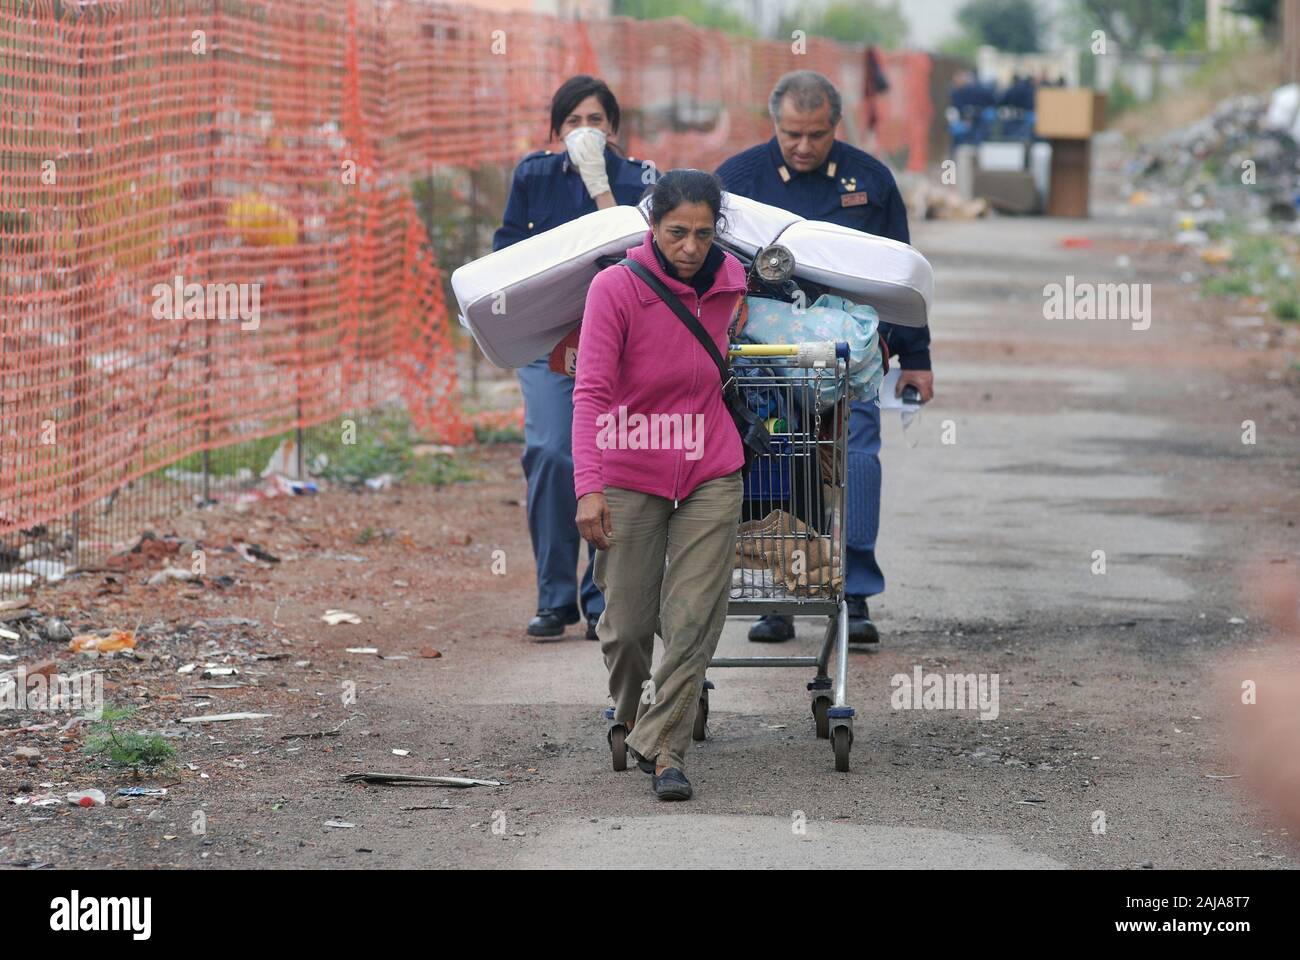 Pavia (Lombardy, Italy), Romanian Roma immigrants illegally occupy the abandoned former Snia Viscosa factory and are later cleared out by the police. Stock Photo